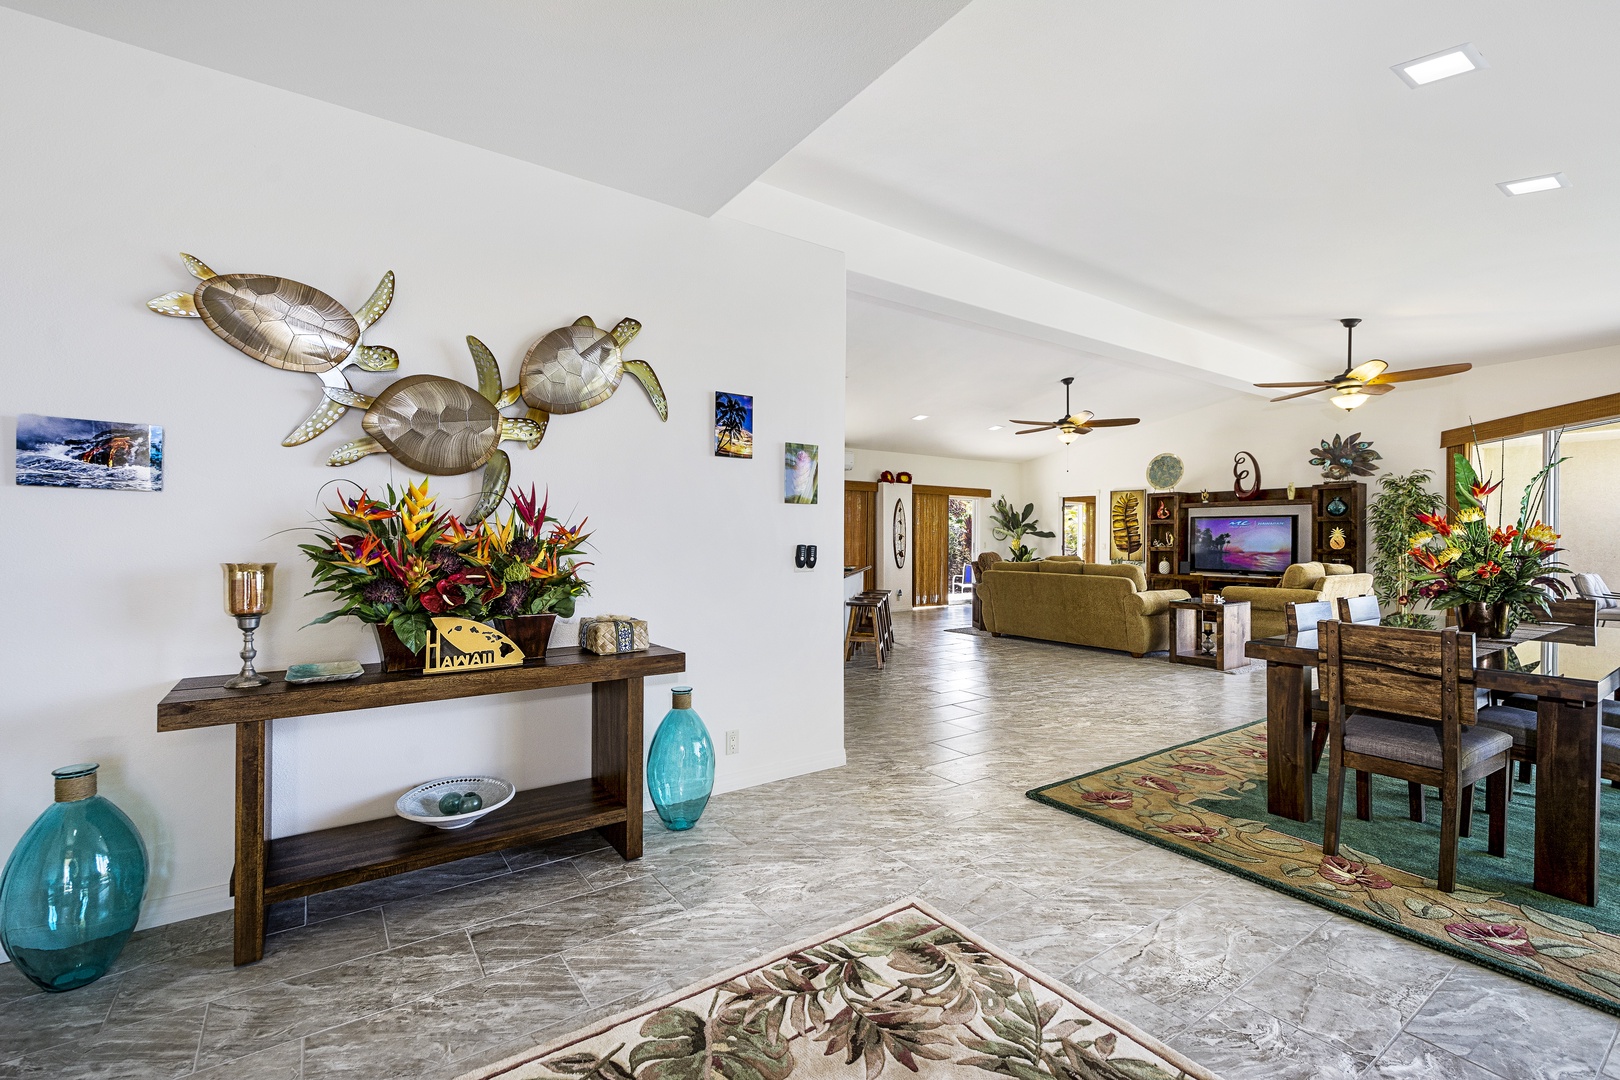 Kailua Kona Vacation Rentals, Maile Hale - Open sightlines throughout the home!